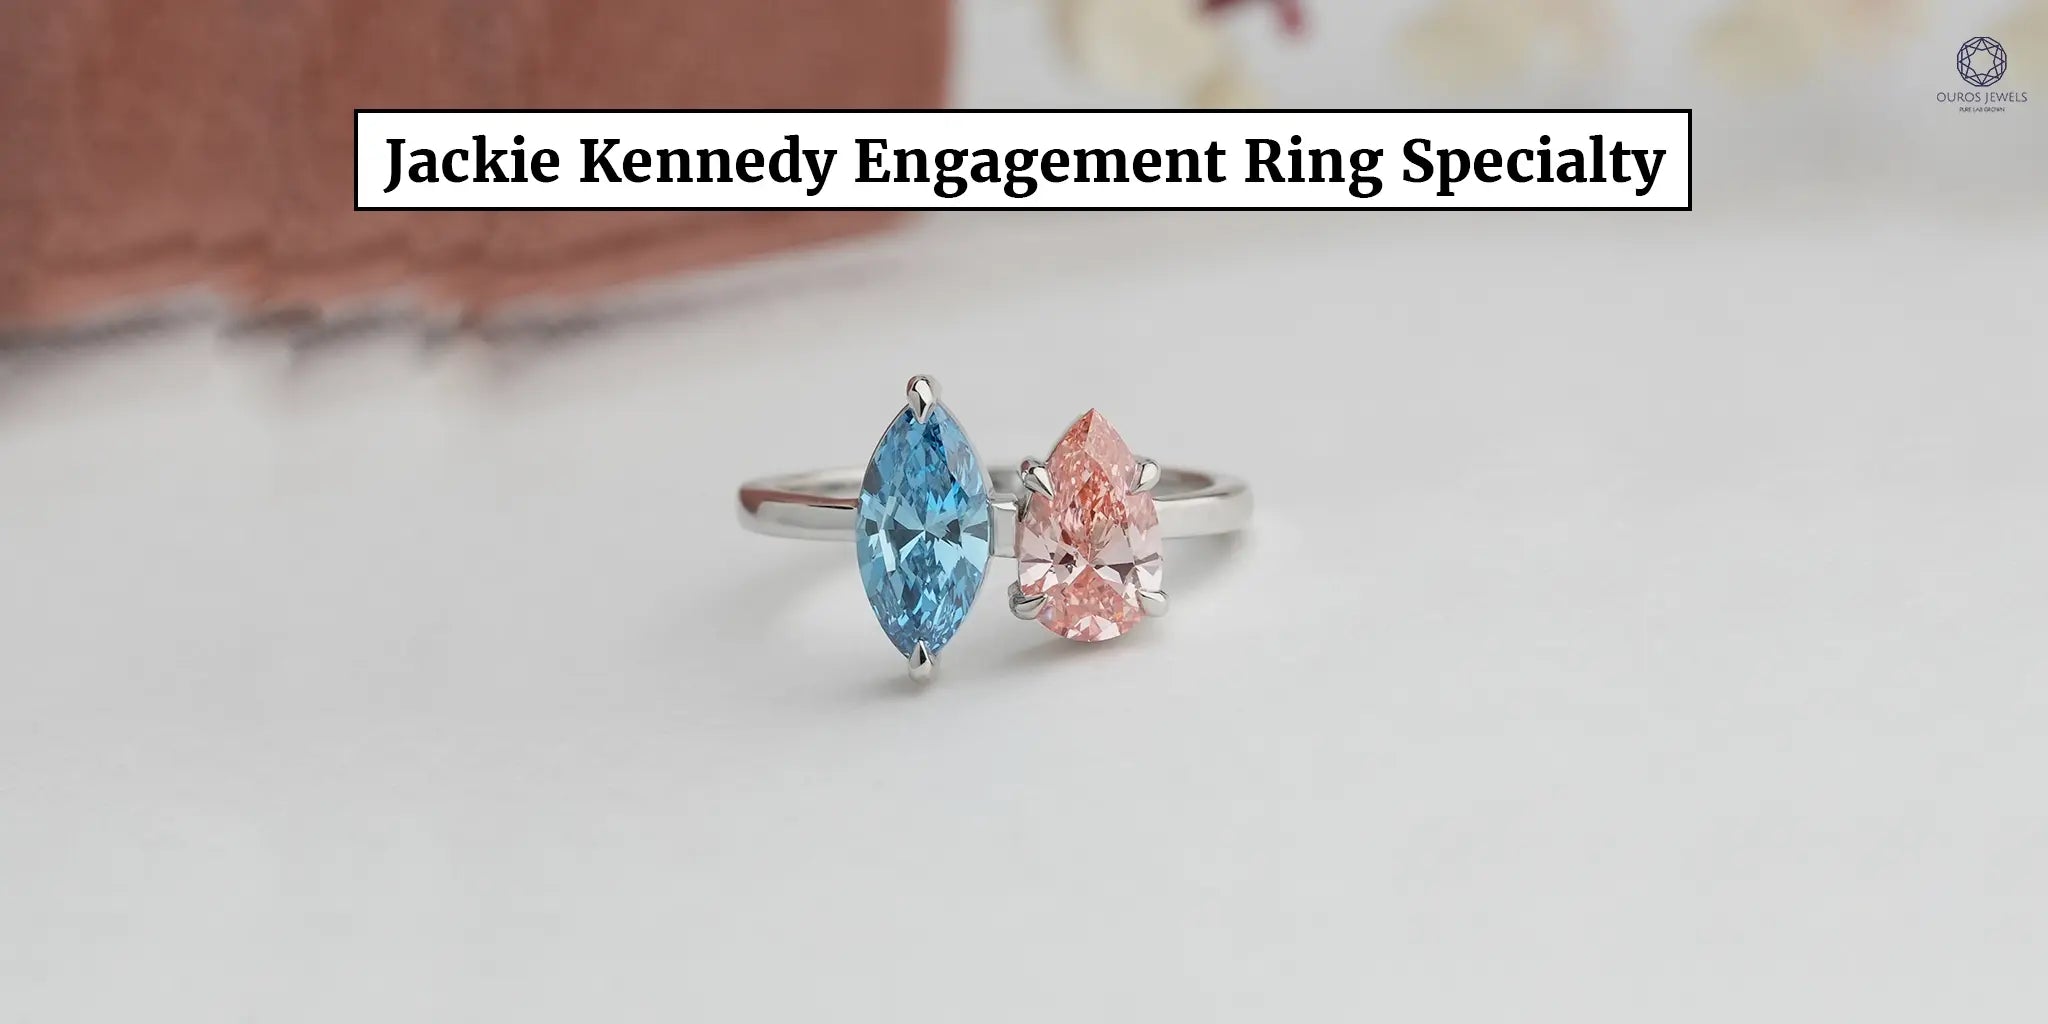 USA's former first lady Jackie Kennedy engagement ring